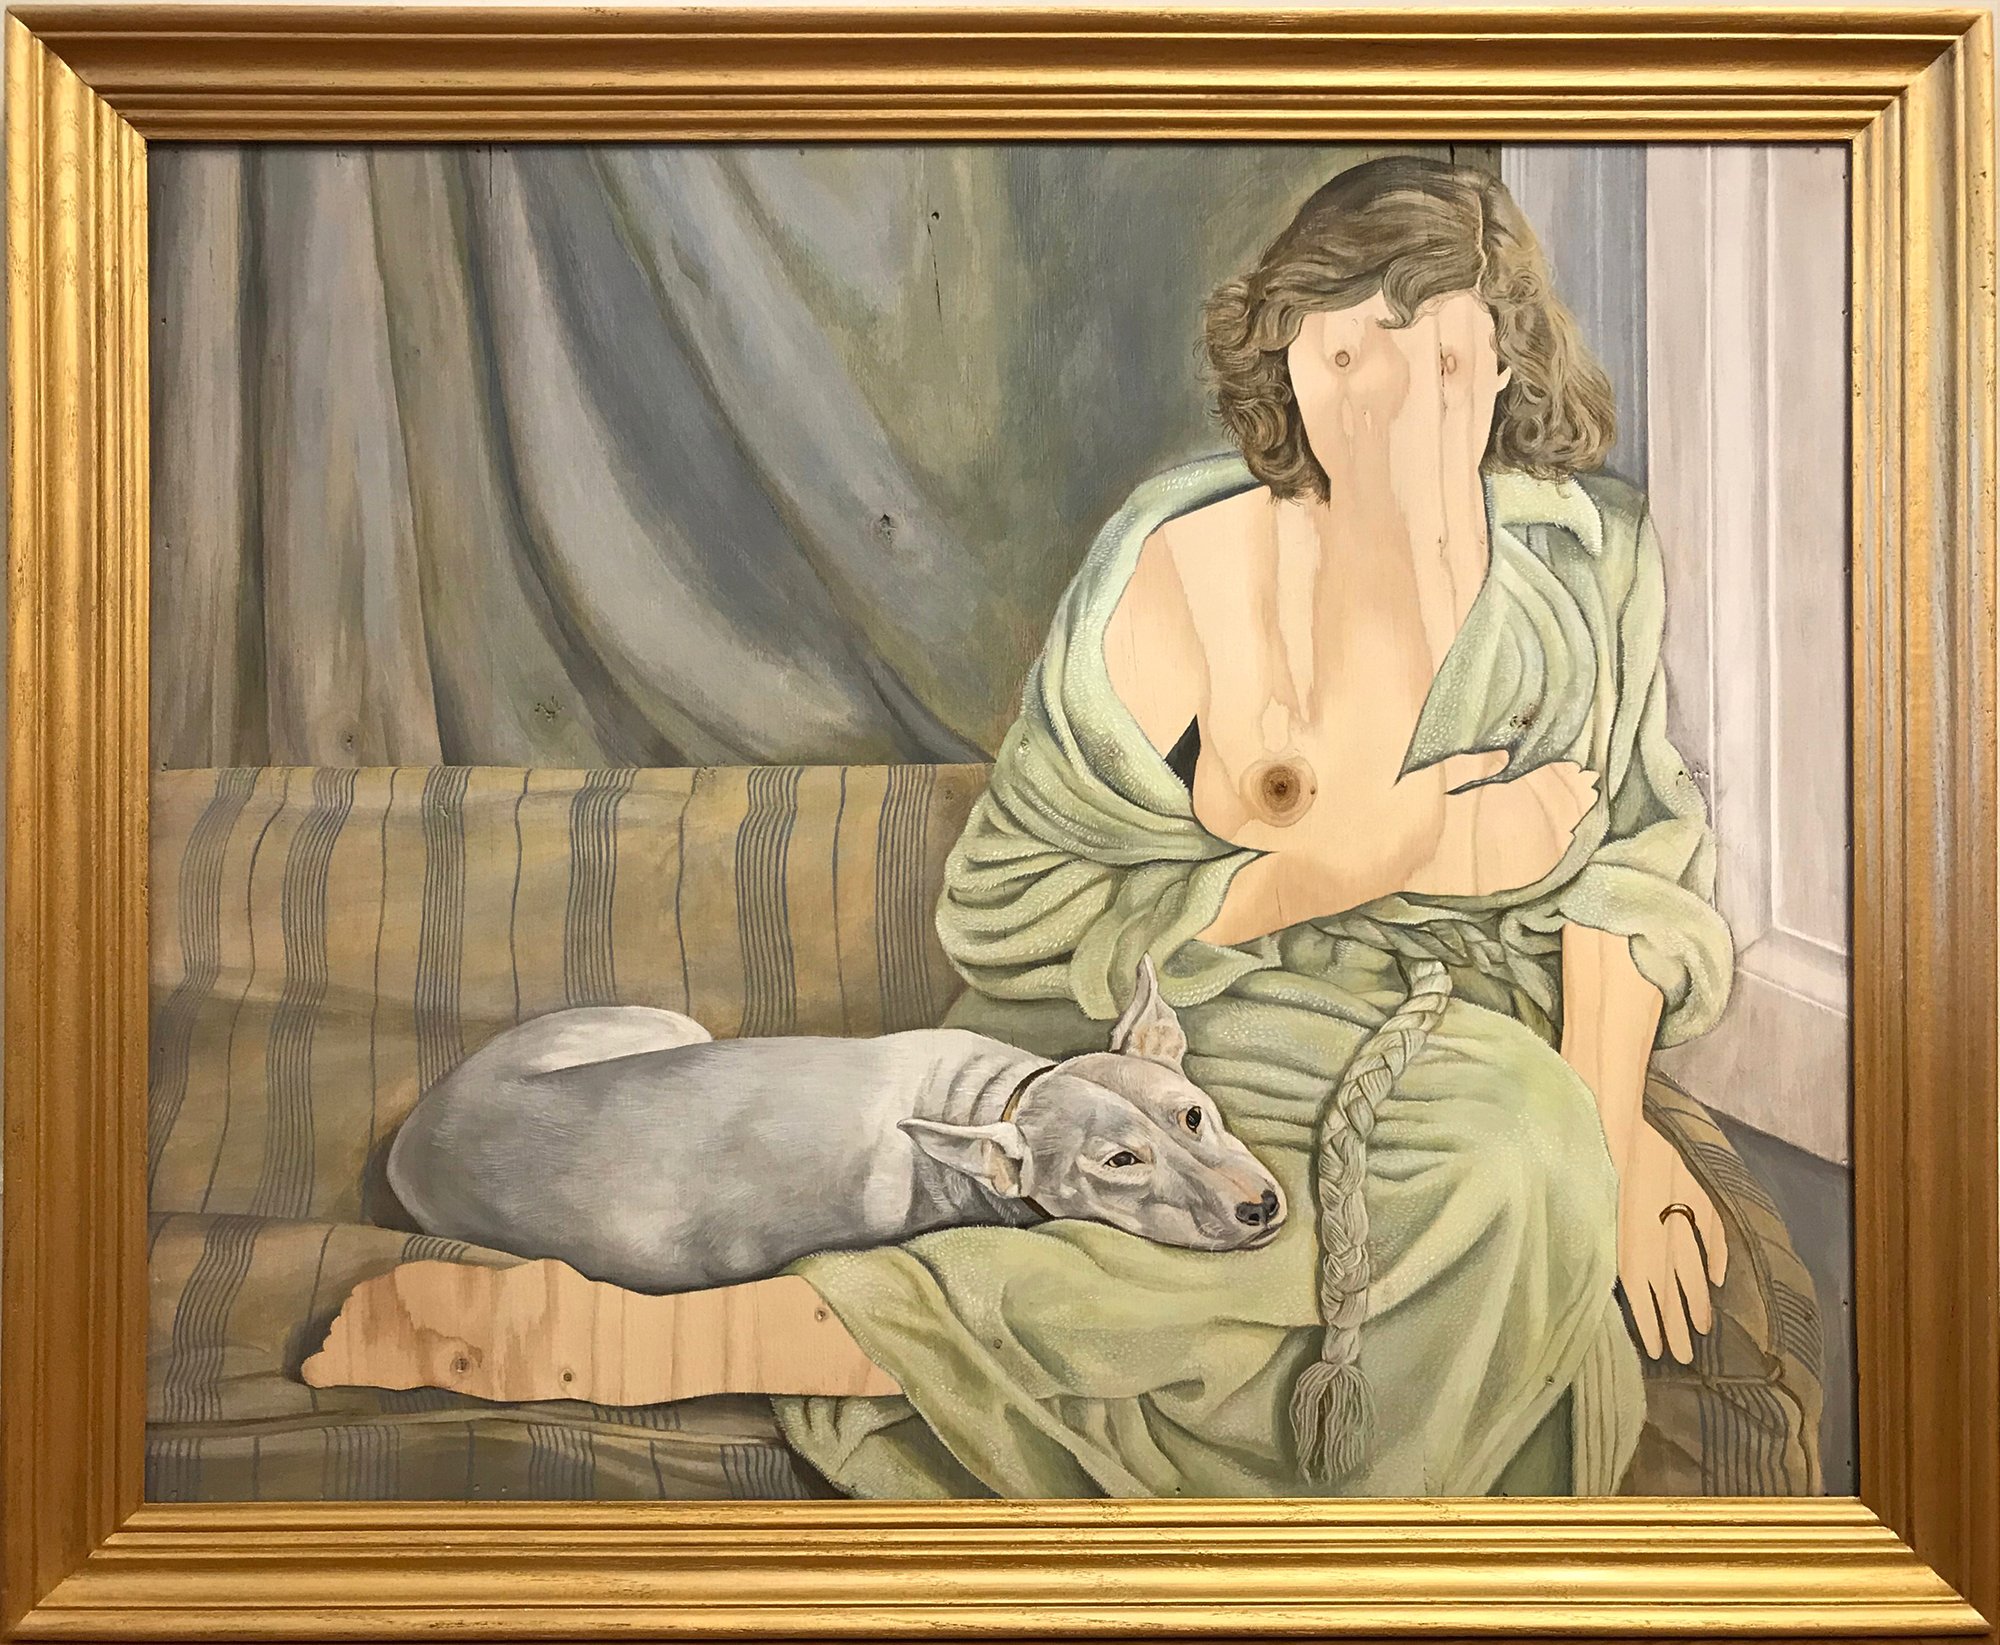 LCharters_From The Missing Women Series, Framed Freud's Young Muse with a White Dog.jpg